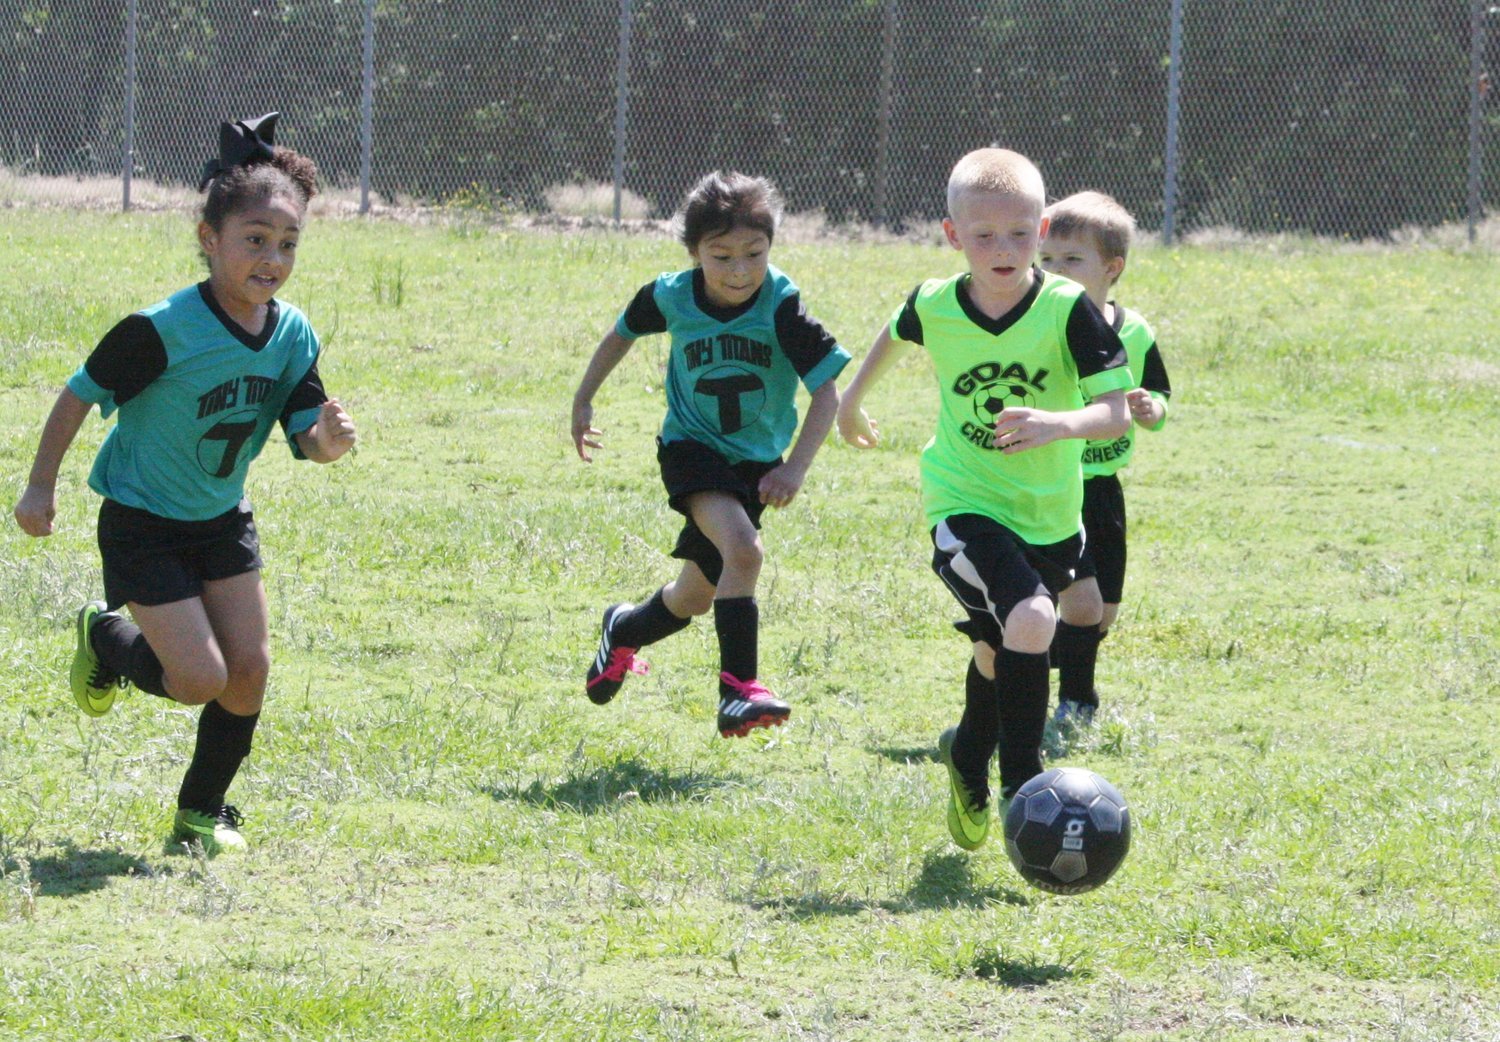 Local youths in hot pursuit of the soccer ball during a Saturday morning game of the Mineola Soccer Association.